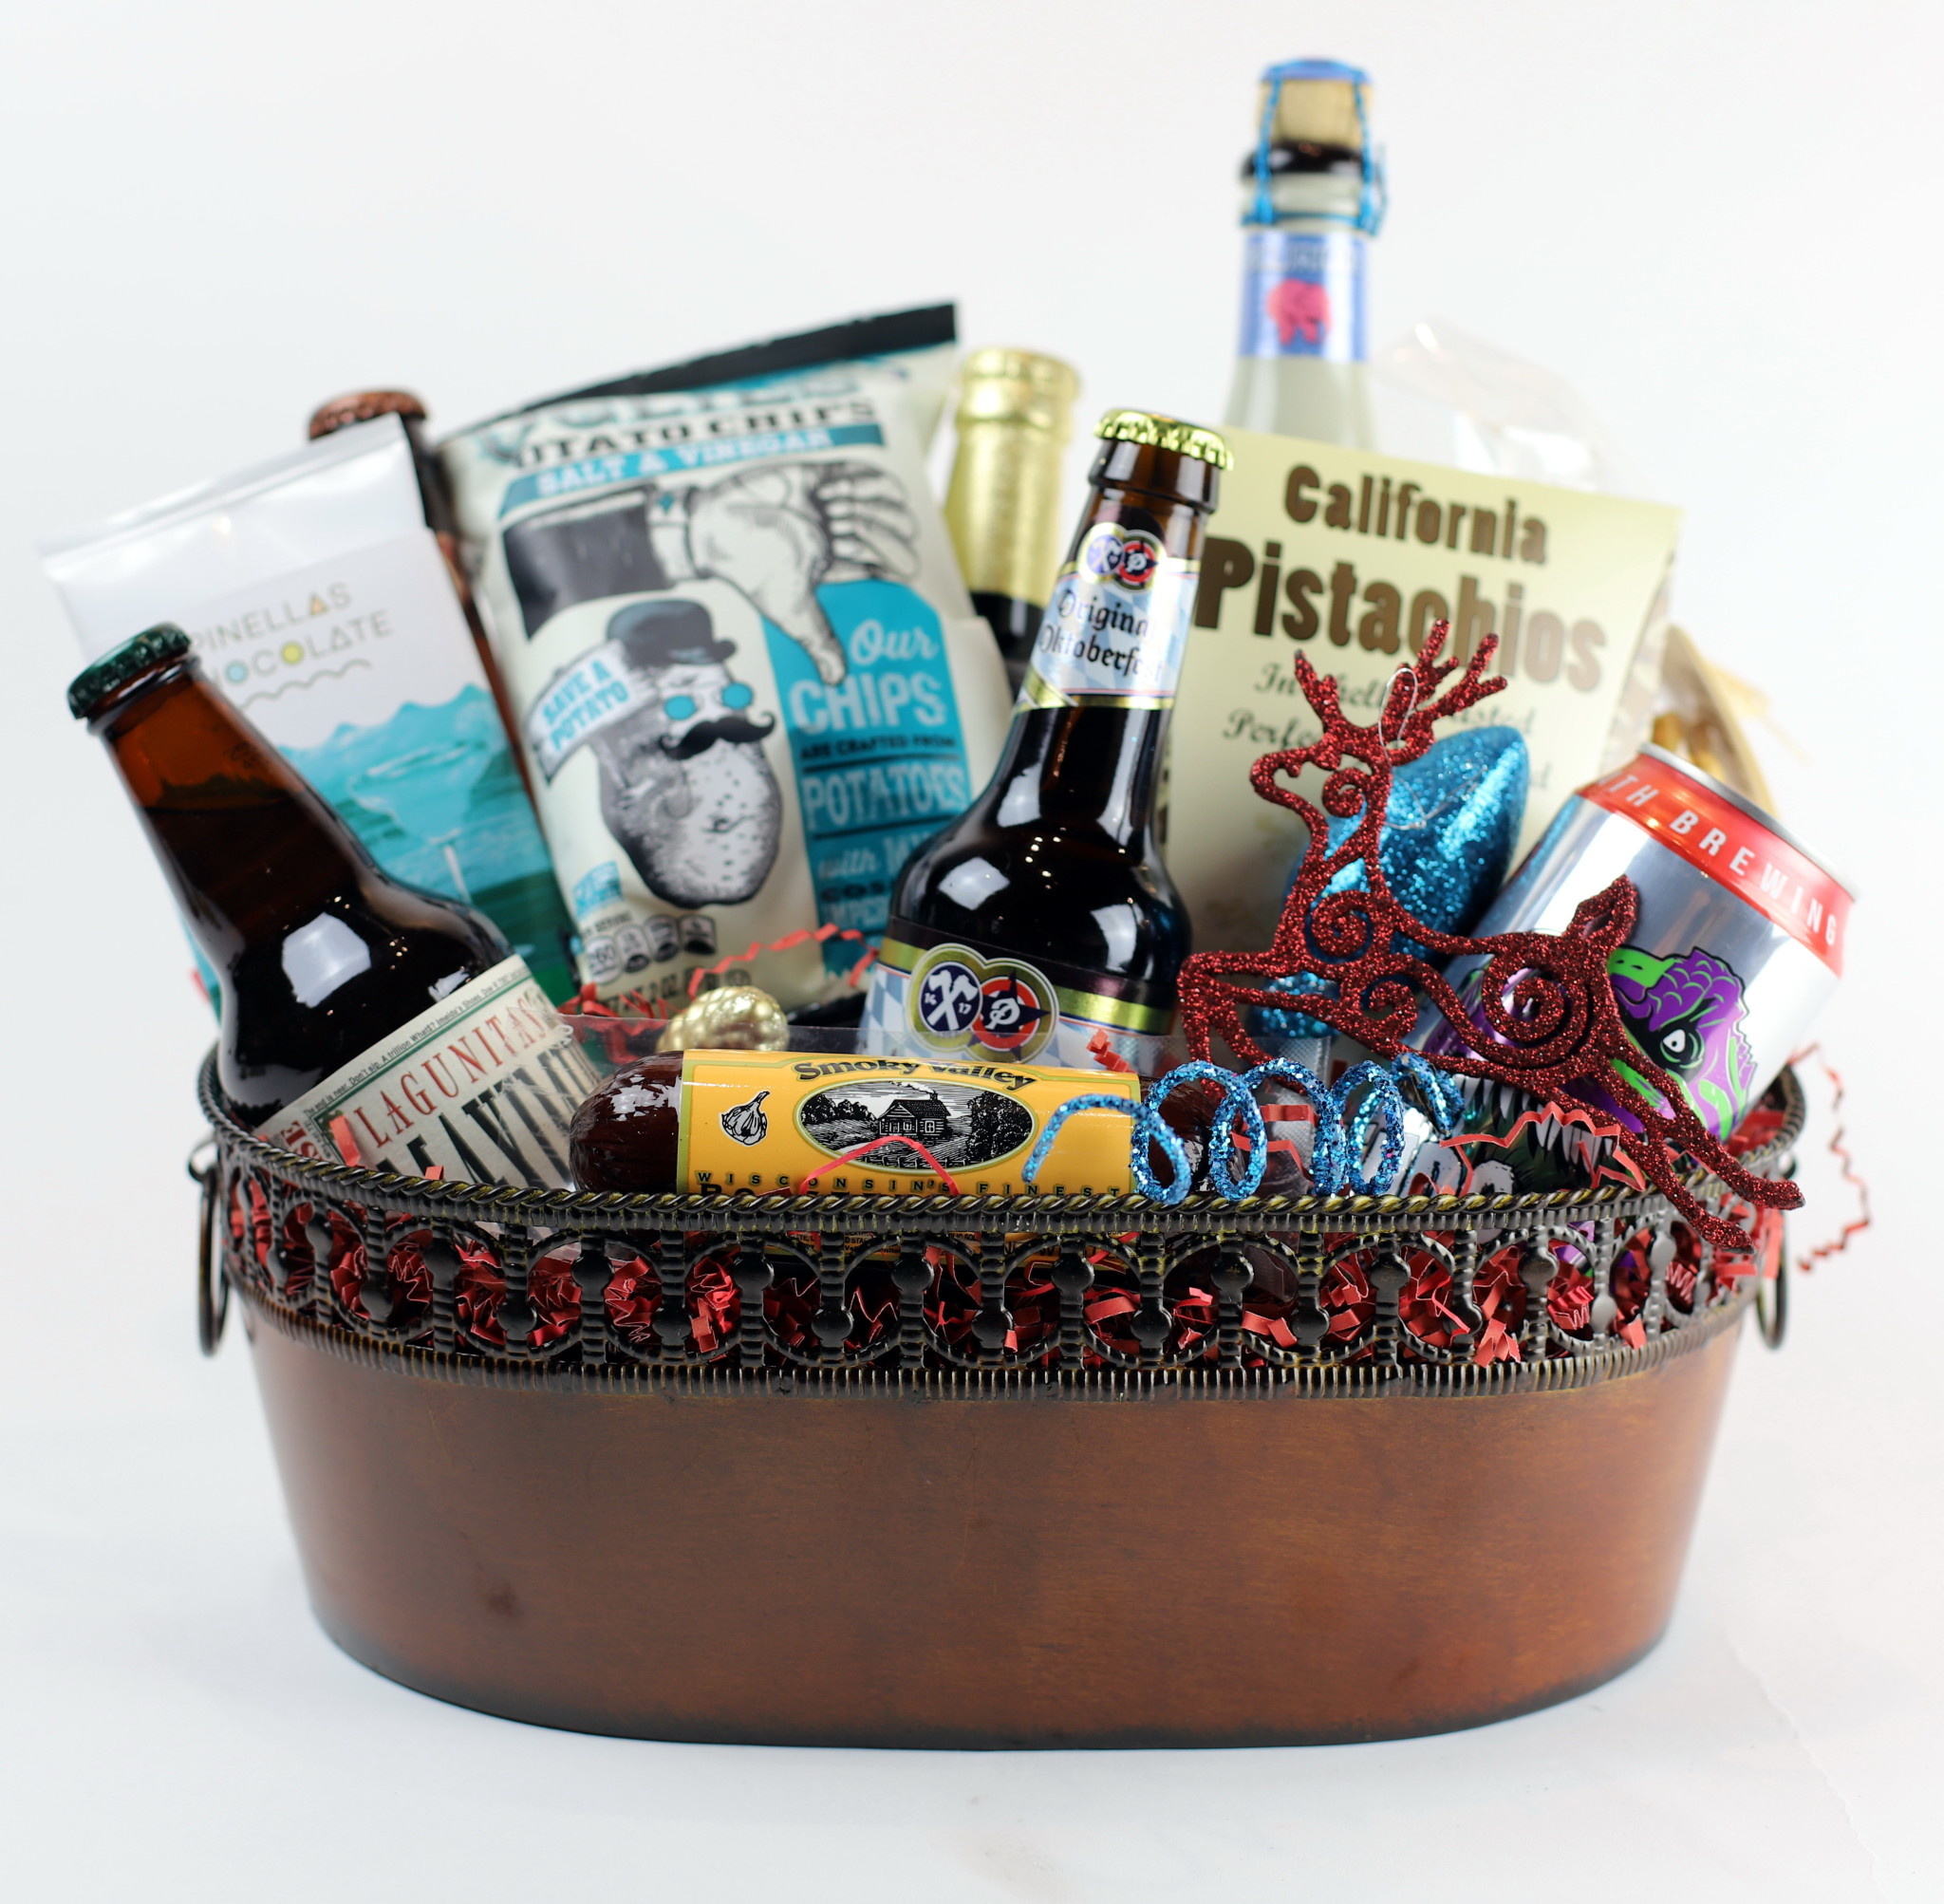 Meat, Cheese & Beer Gift Set - beer gift baskets - United States delivery